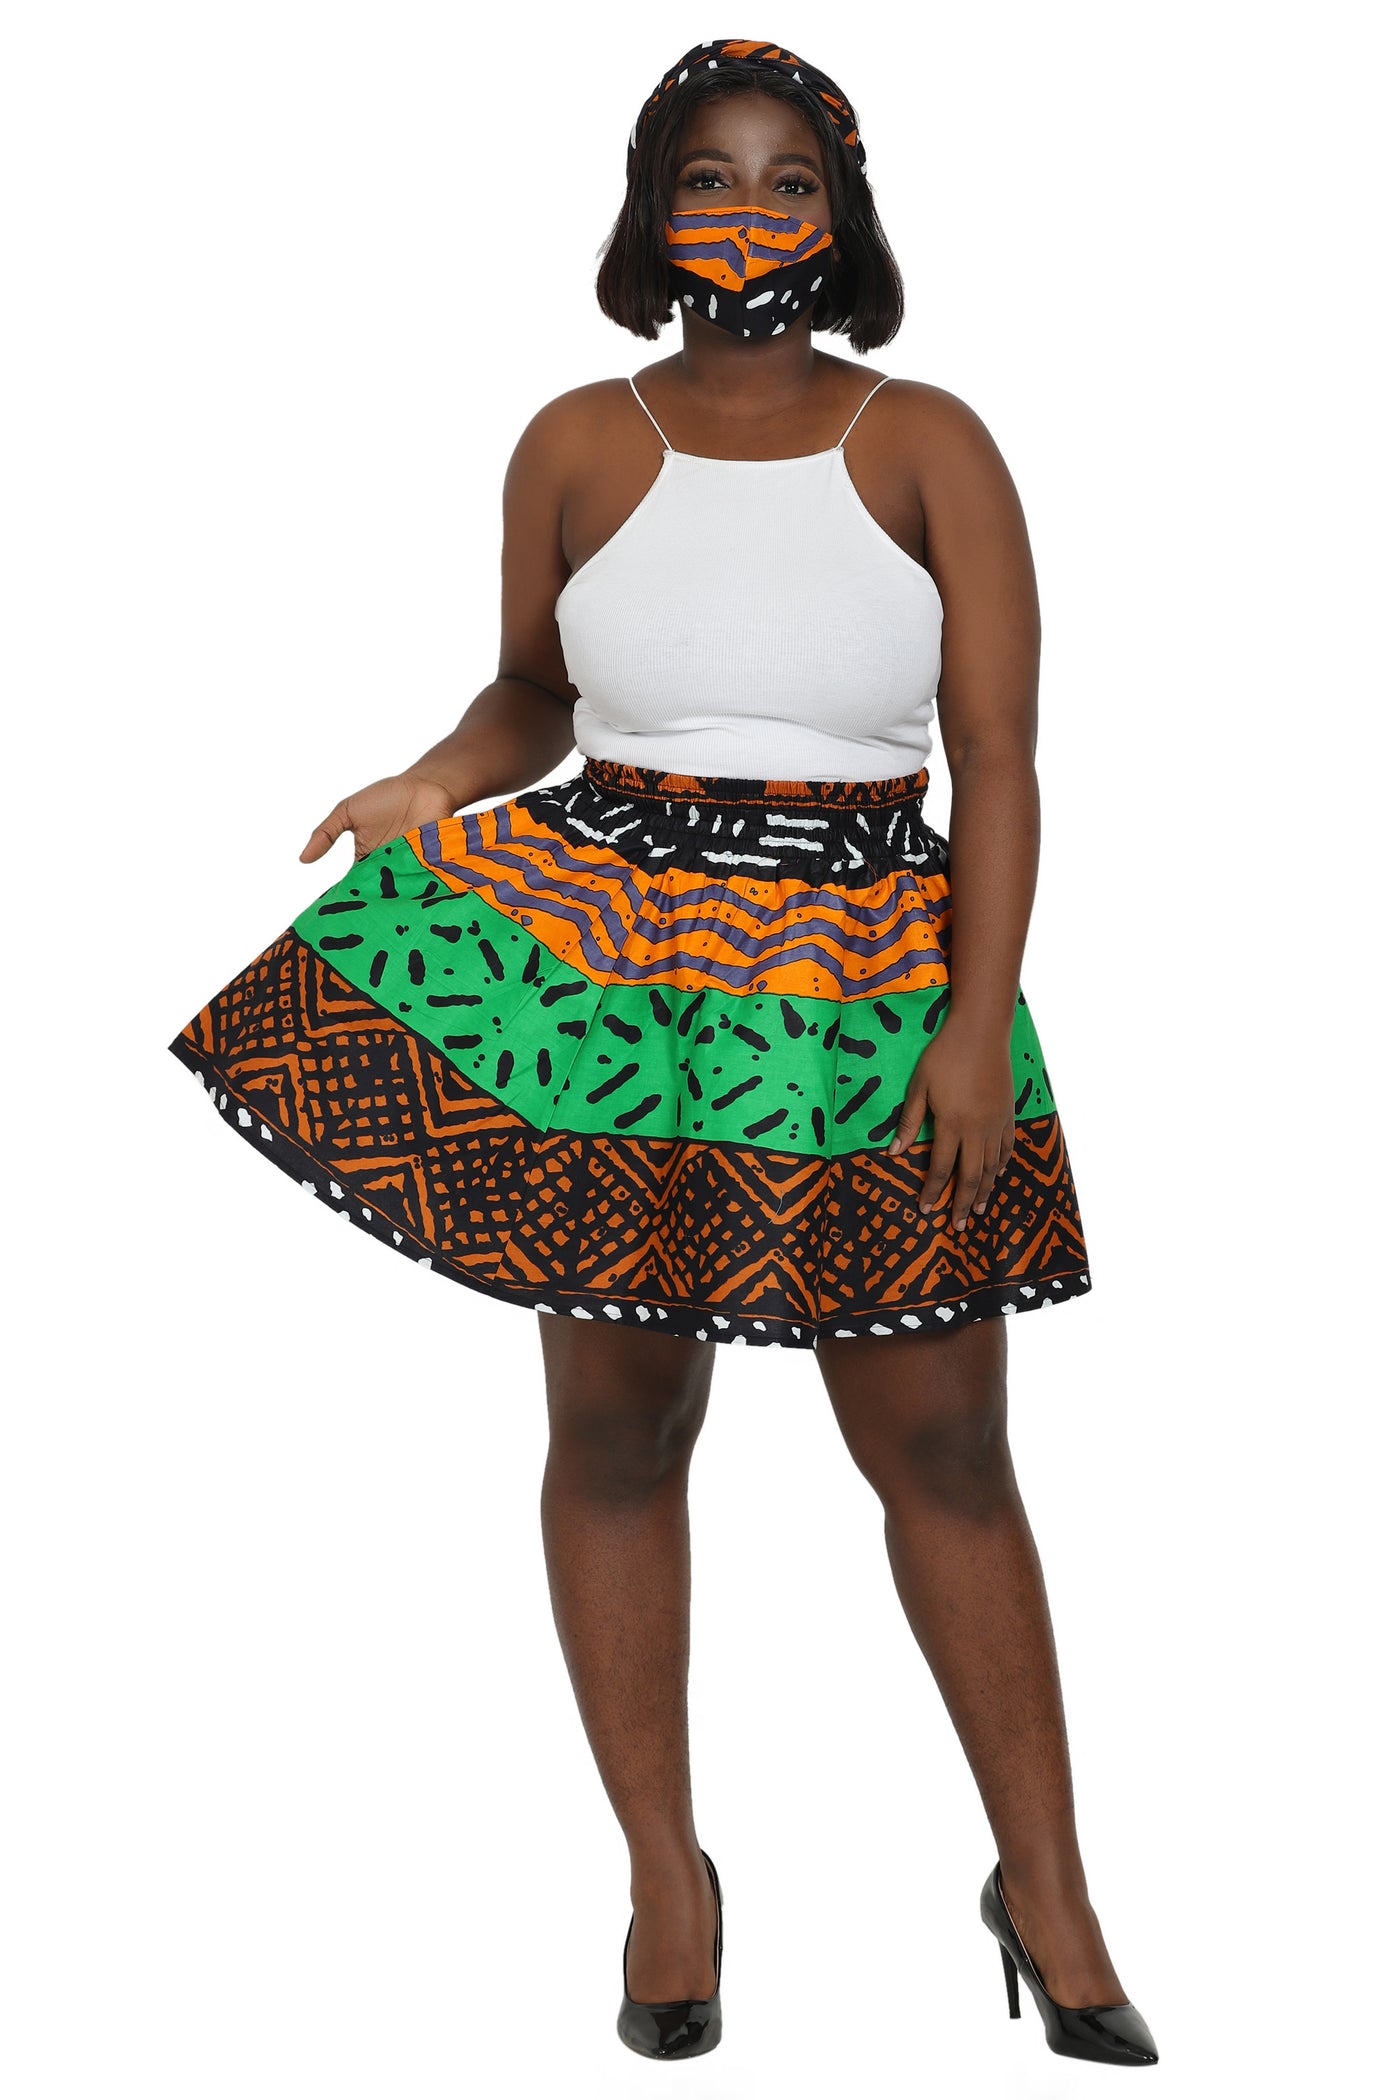 Short Length African Print Skirt One Size Fits Most 16412